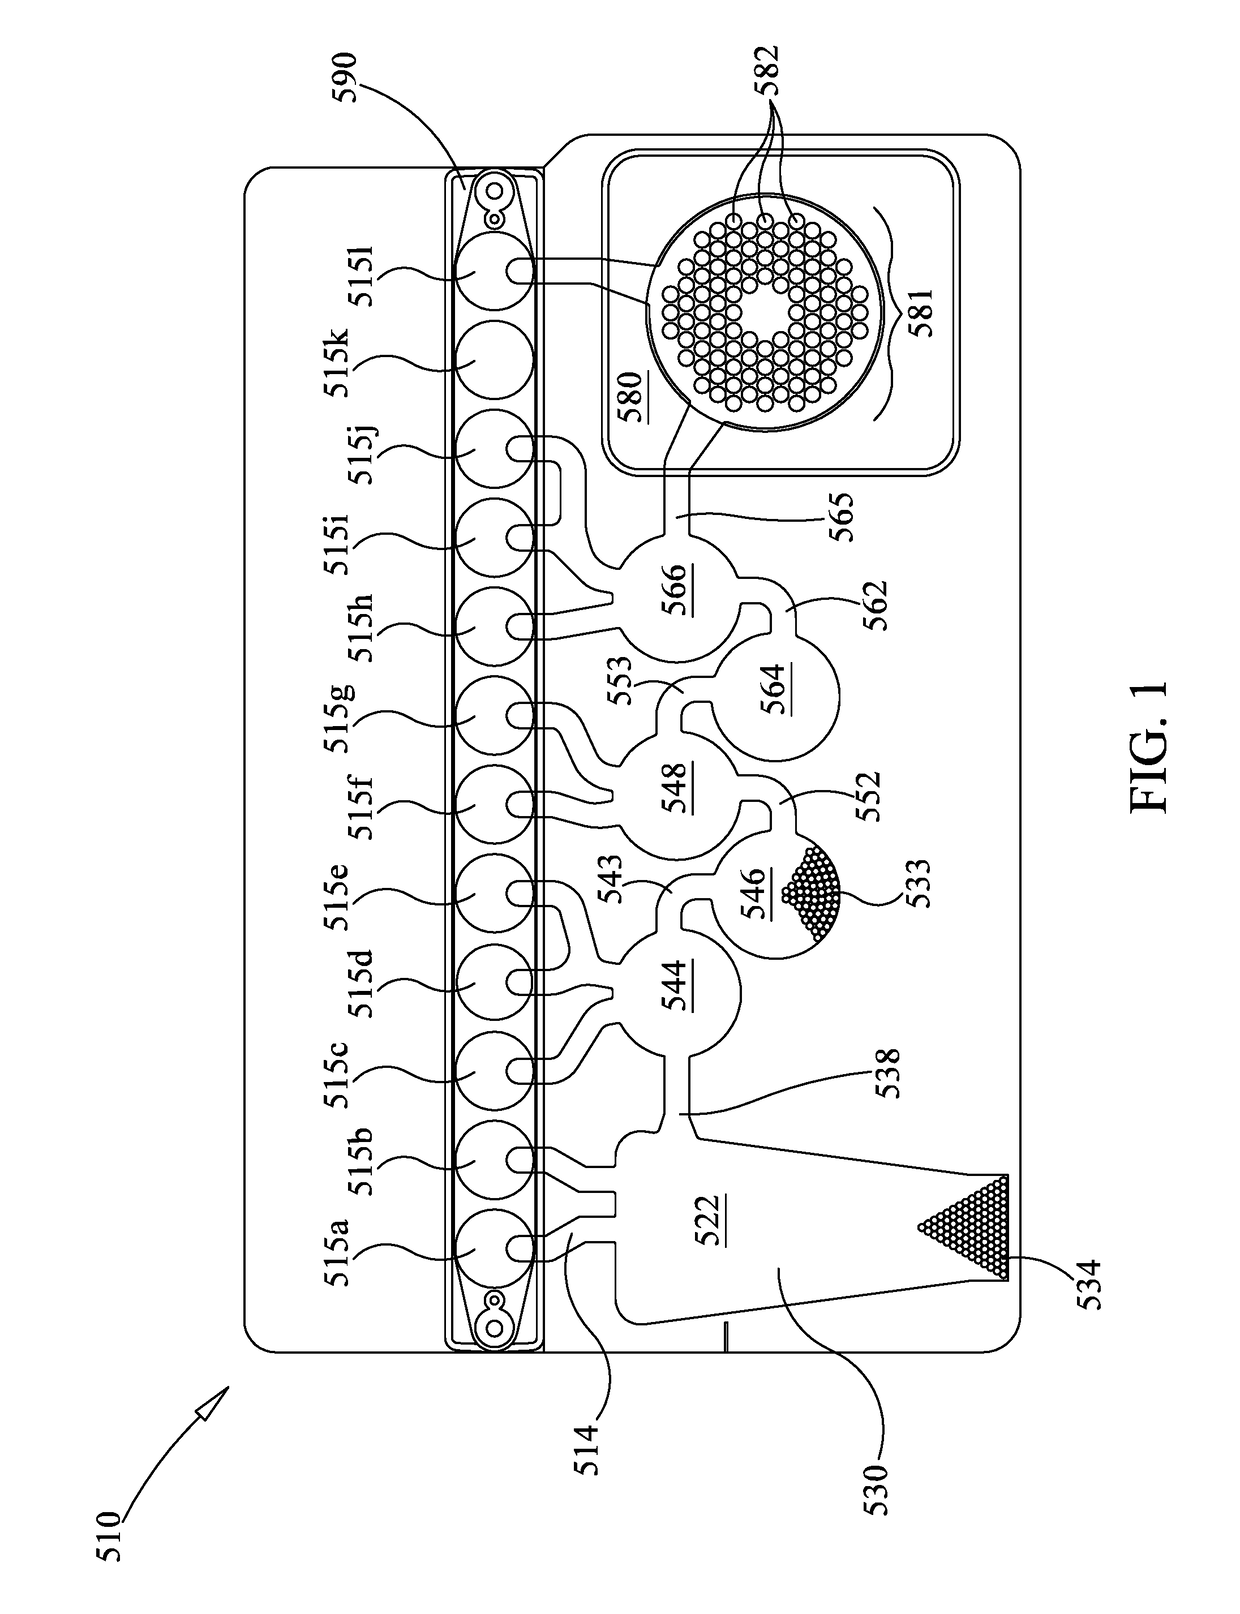 Devices and methods for rapid PCR